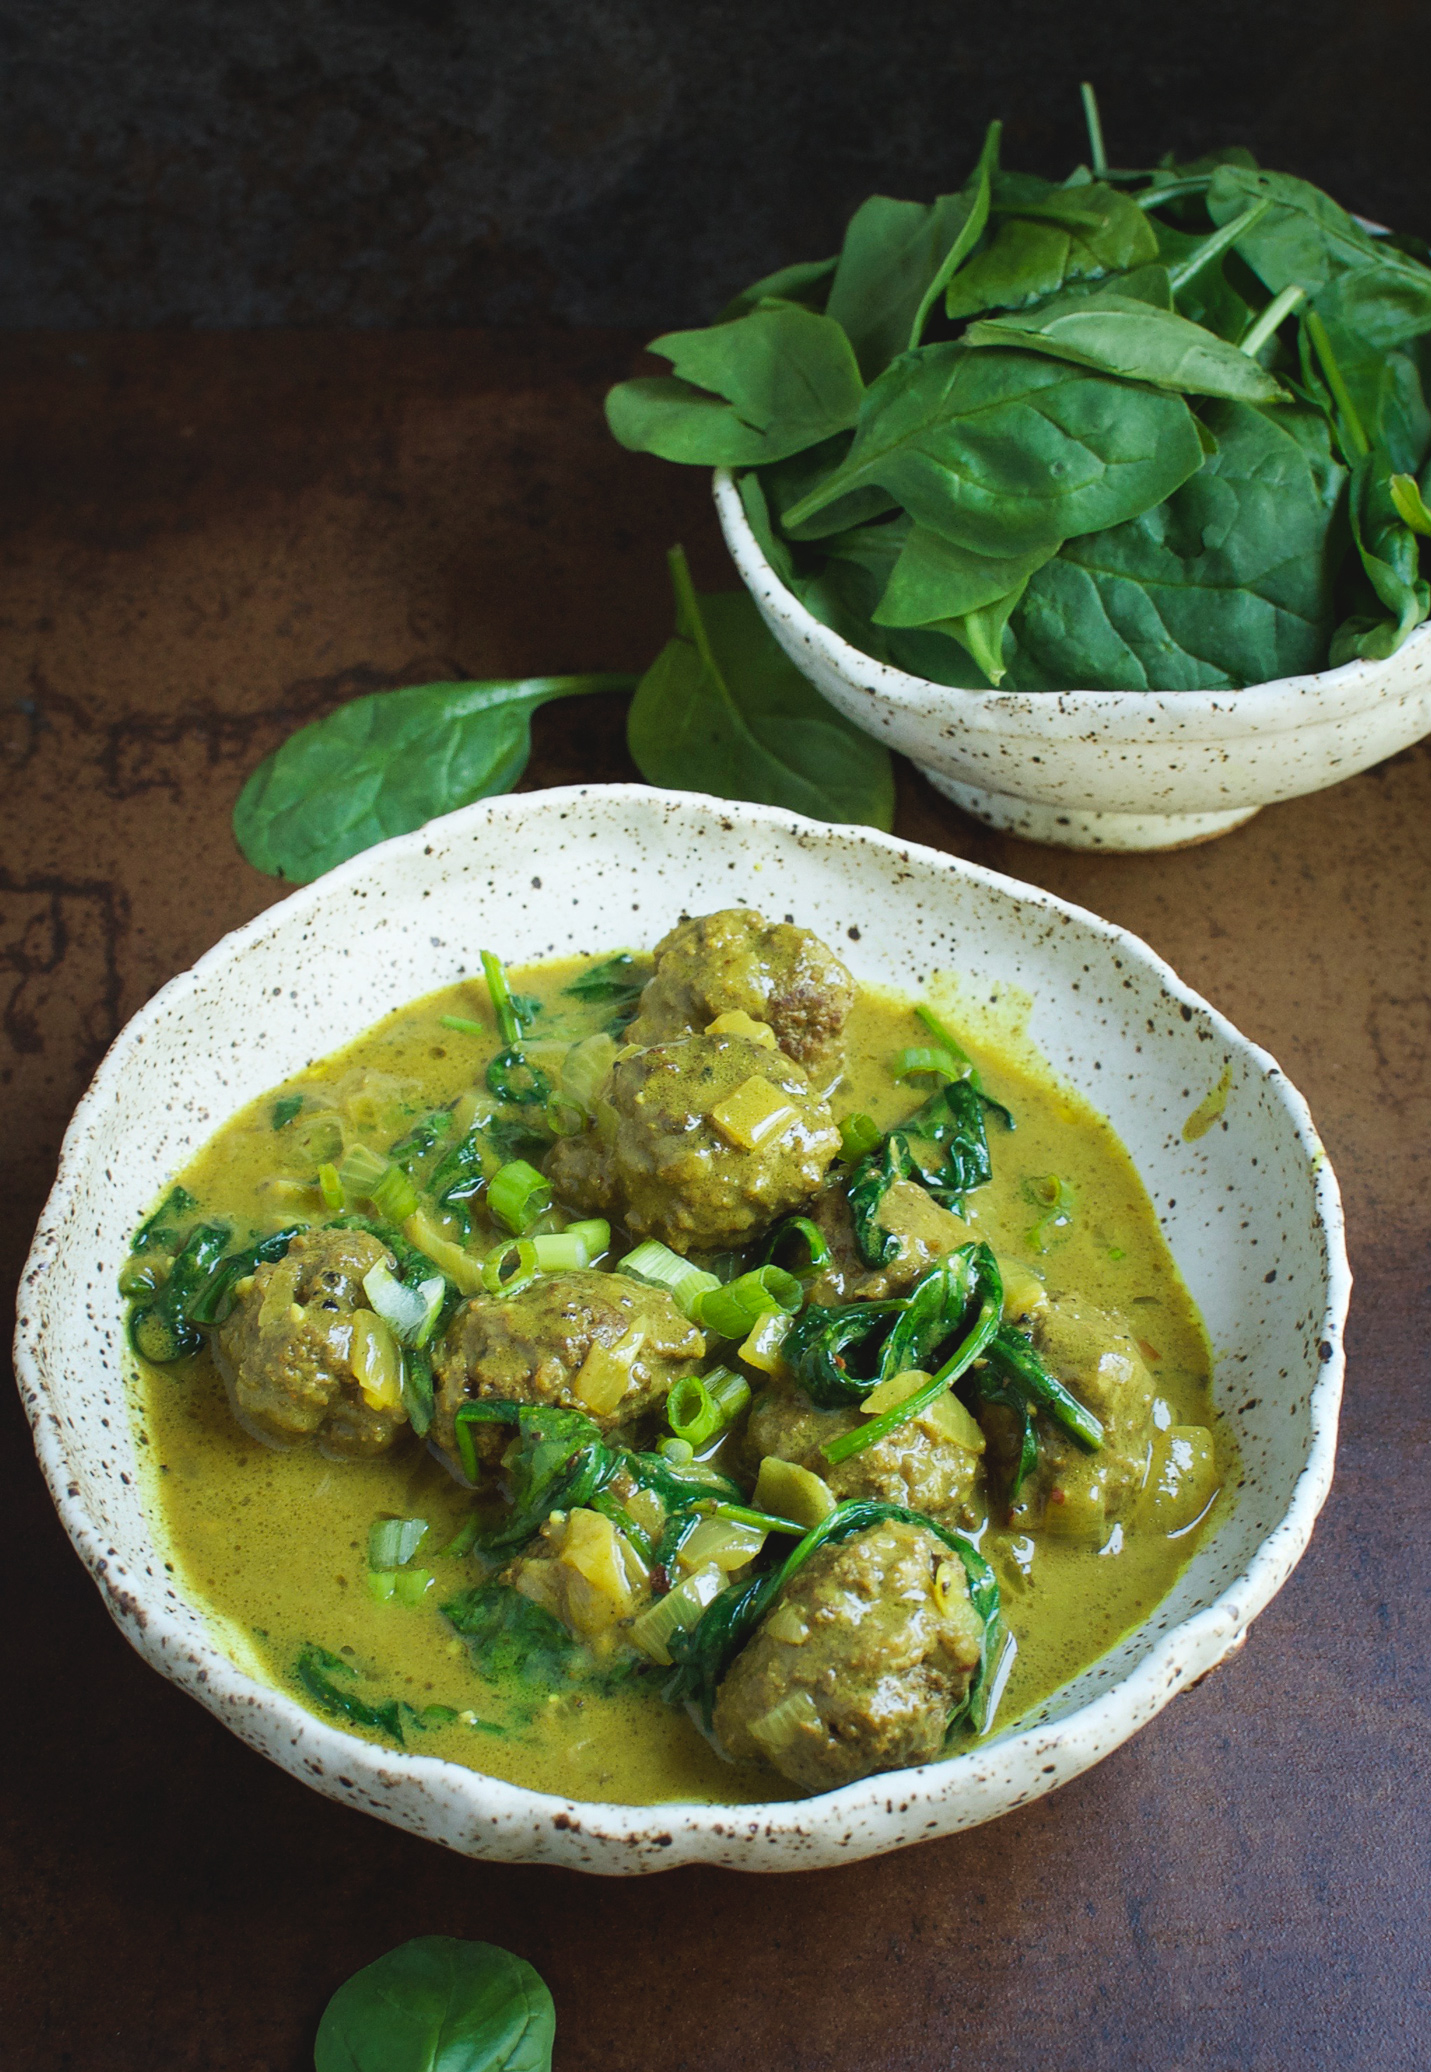 These Paleo curried meatballs will please the whole family! They are gluten-free, dairy-free and grain free. What a delicious, nutrition-packed weekday meal!